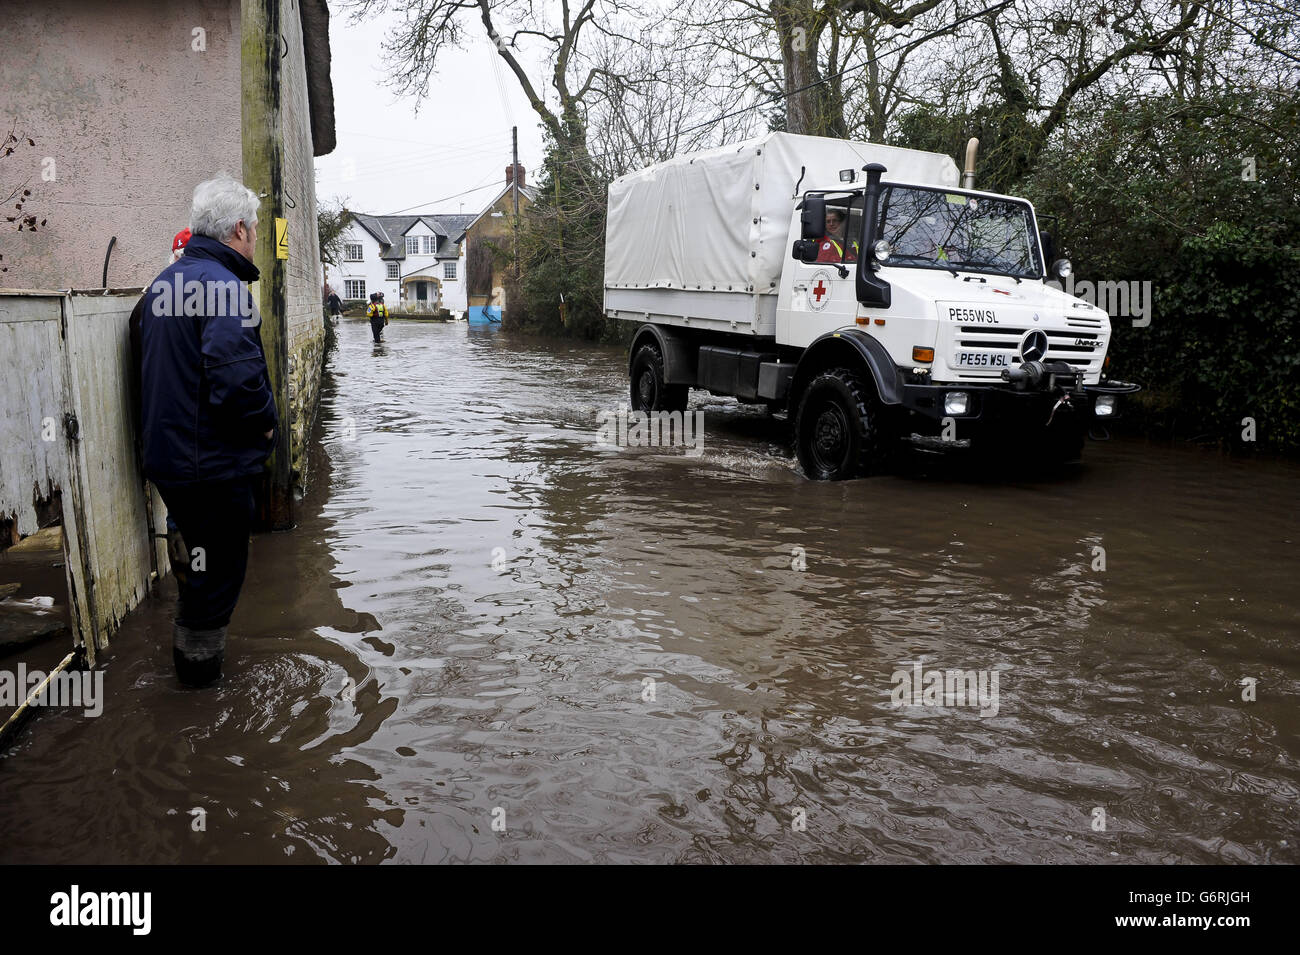 A man watches a Red Cross vehicle drives a flooded road in the village of Muchelney in Somerset. Stock Photo